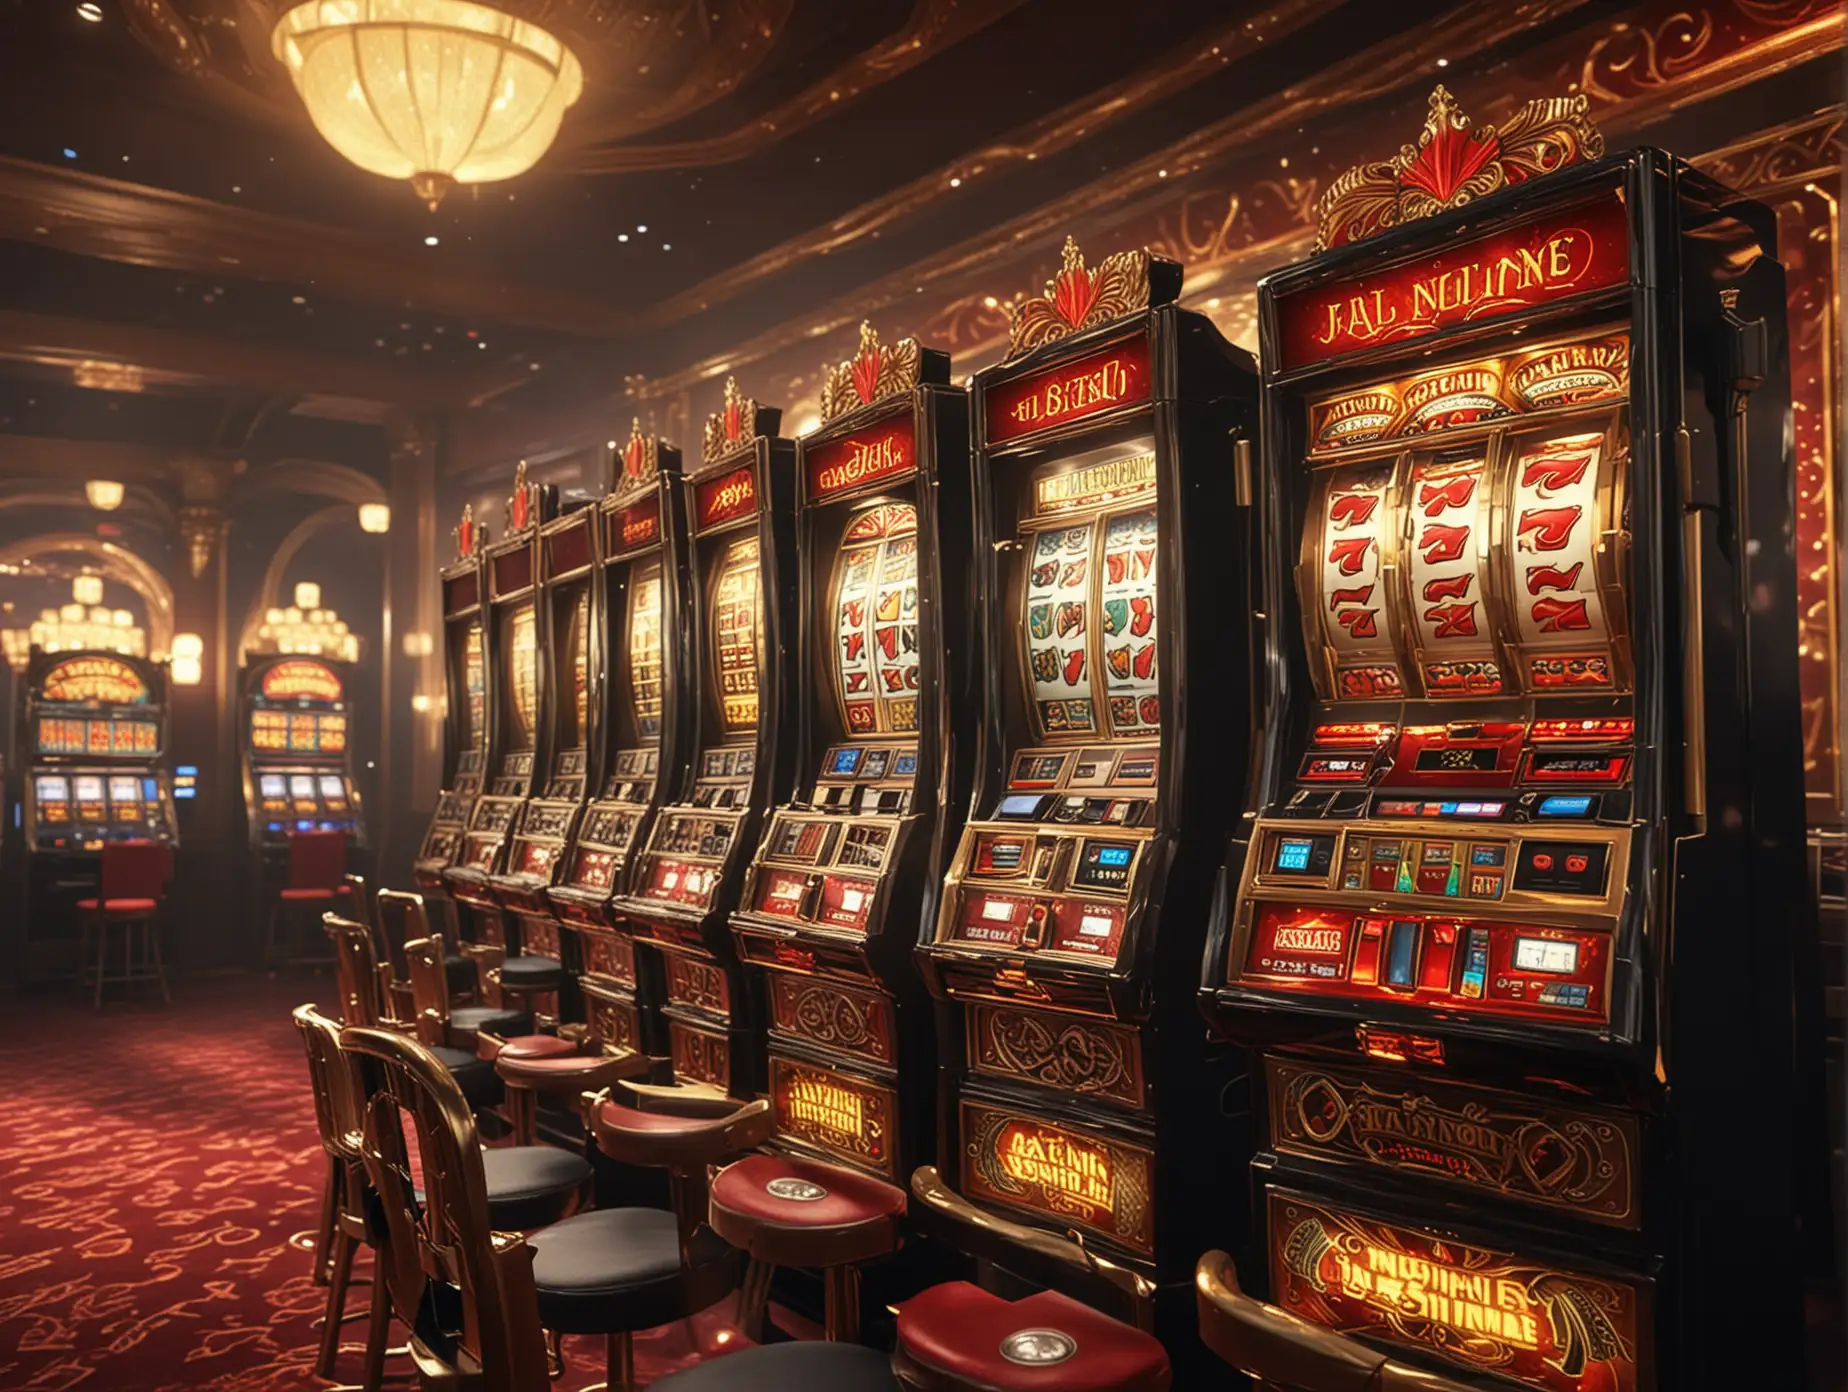 Luxurious Casino Slot Machine Interior Design in Black Red and Gold with Atmospheric Effects 4K Ultra HD